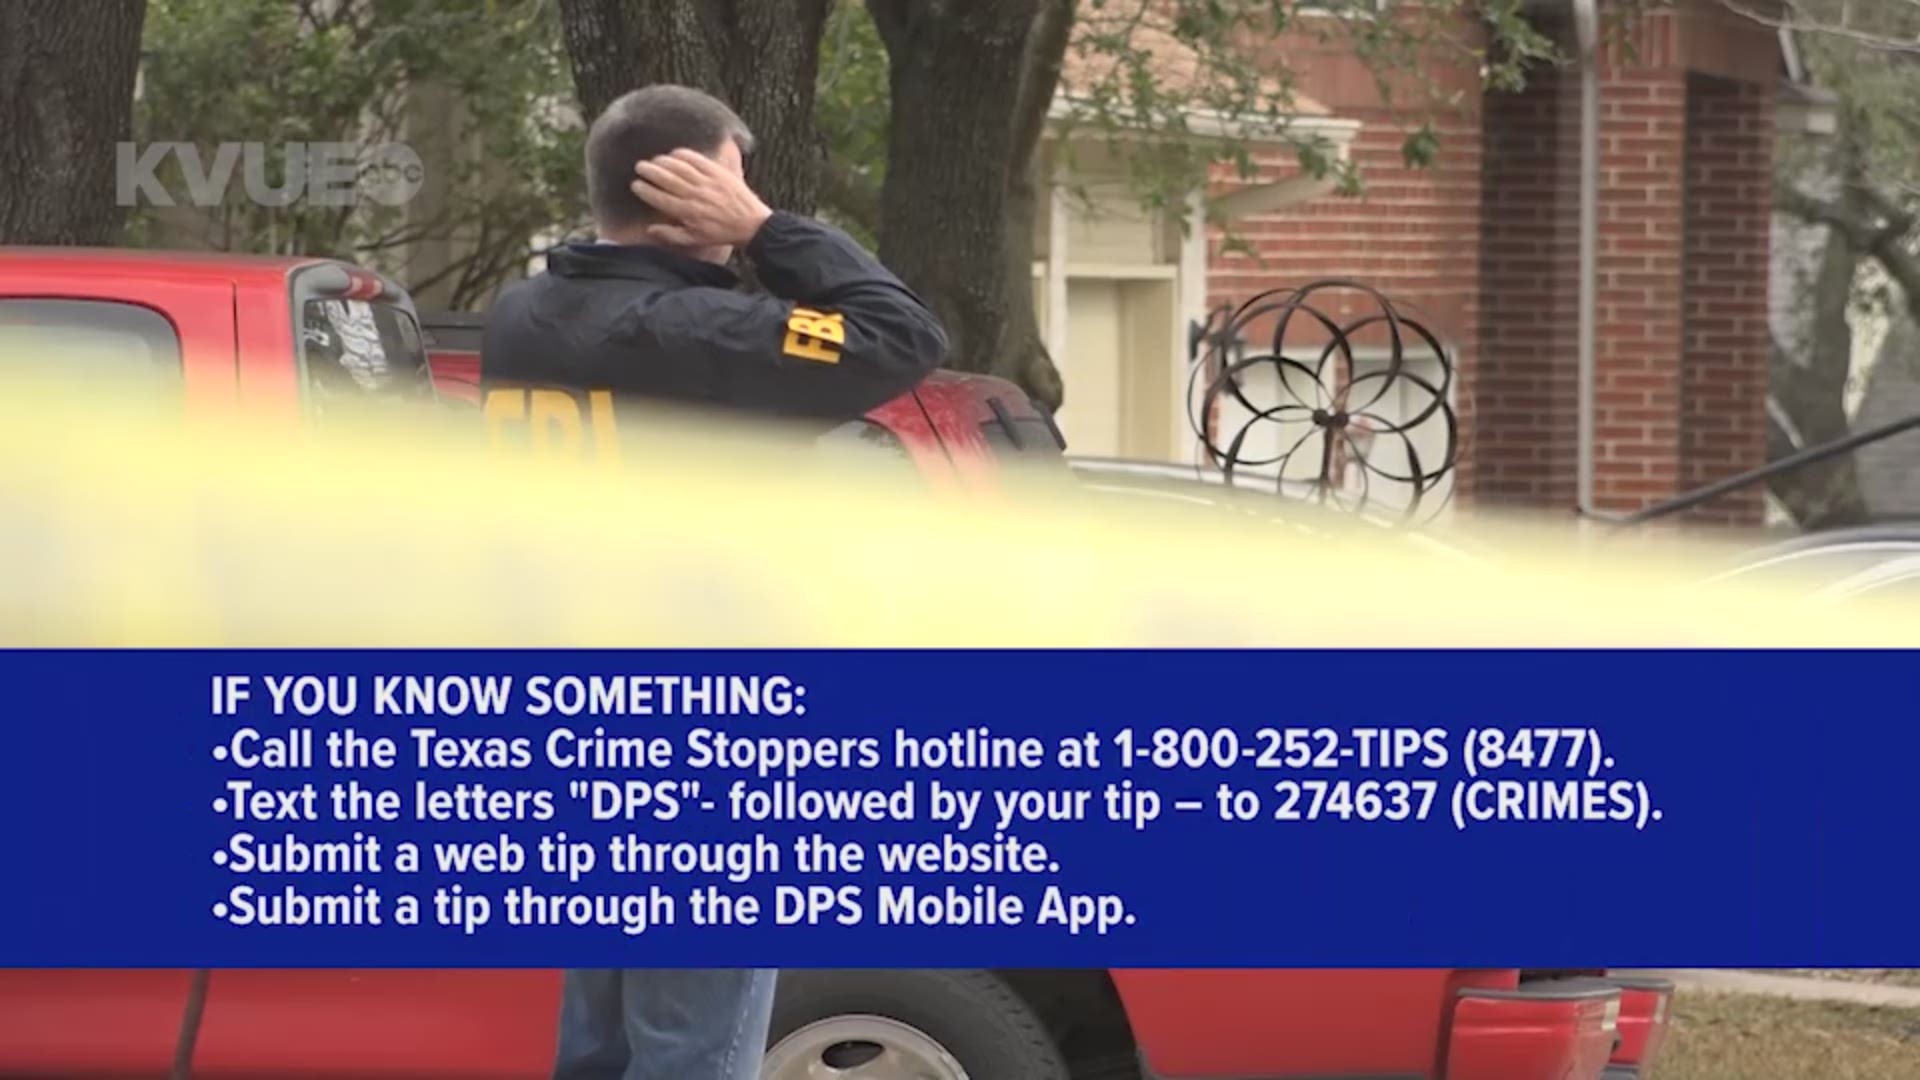 As officials investigate reports of three exploding packages in the Austin area, the office of the governor is offering a $15,000 reward for more information.